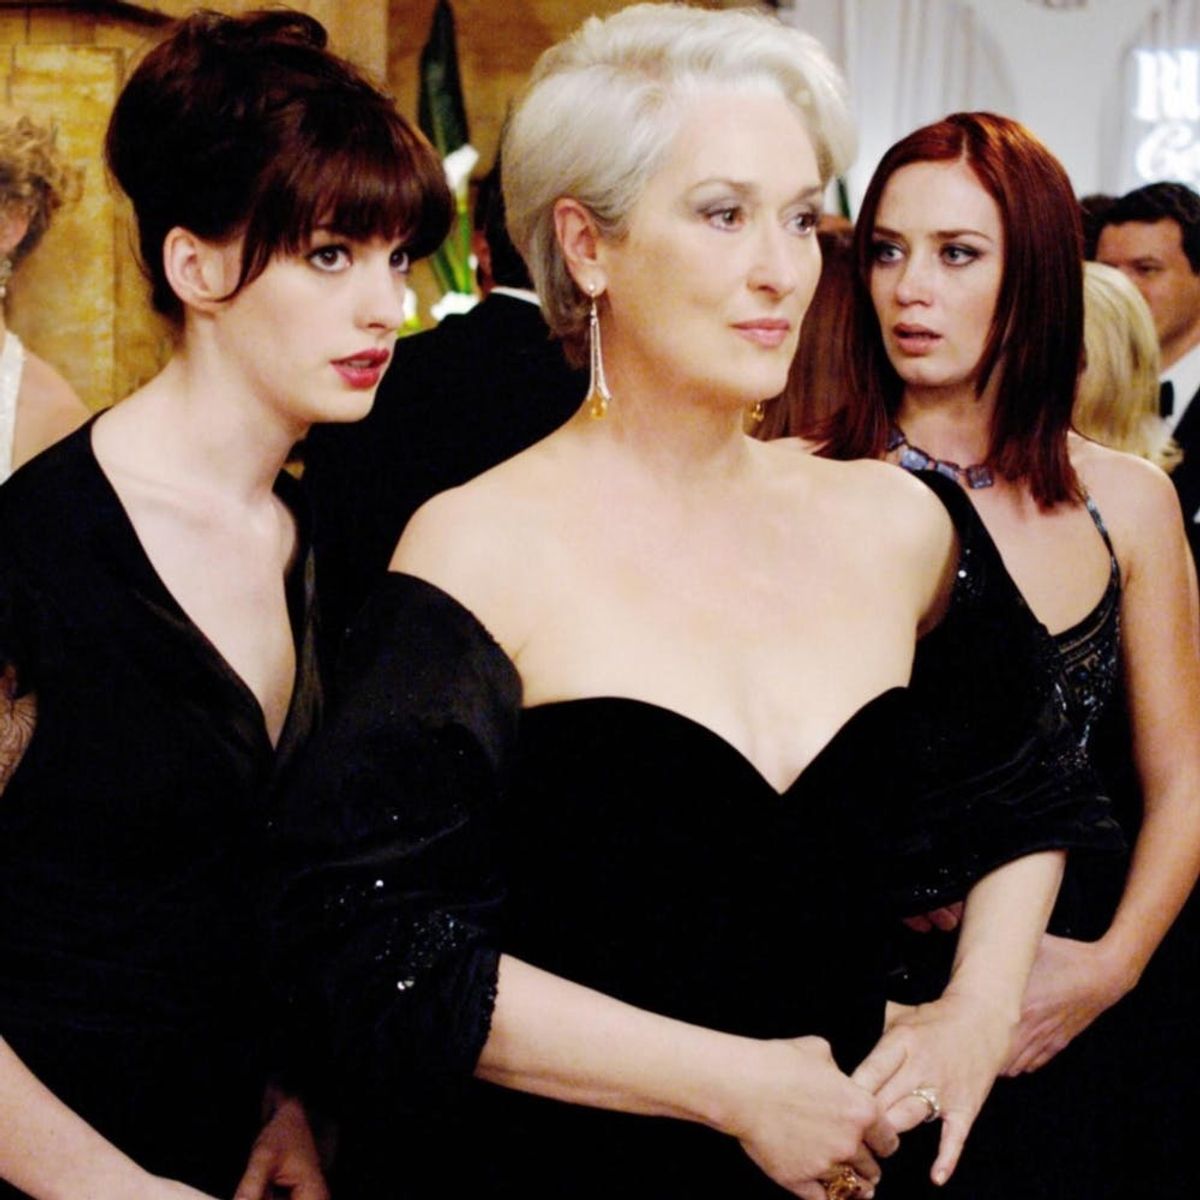 This Deleted Scene from “The Devil Wears Prada” Will Completely Change the Way You See Miranda Priestly